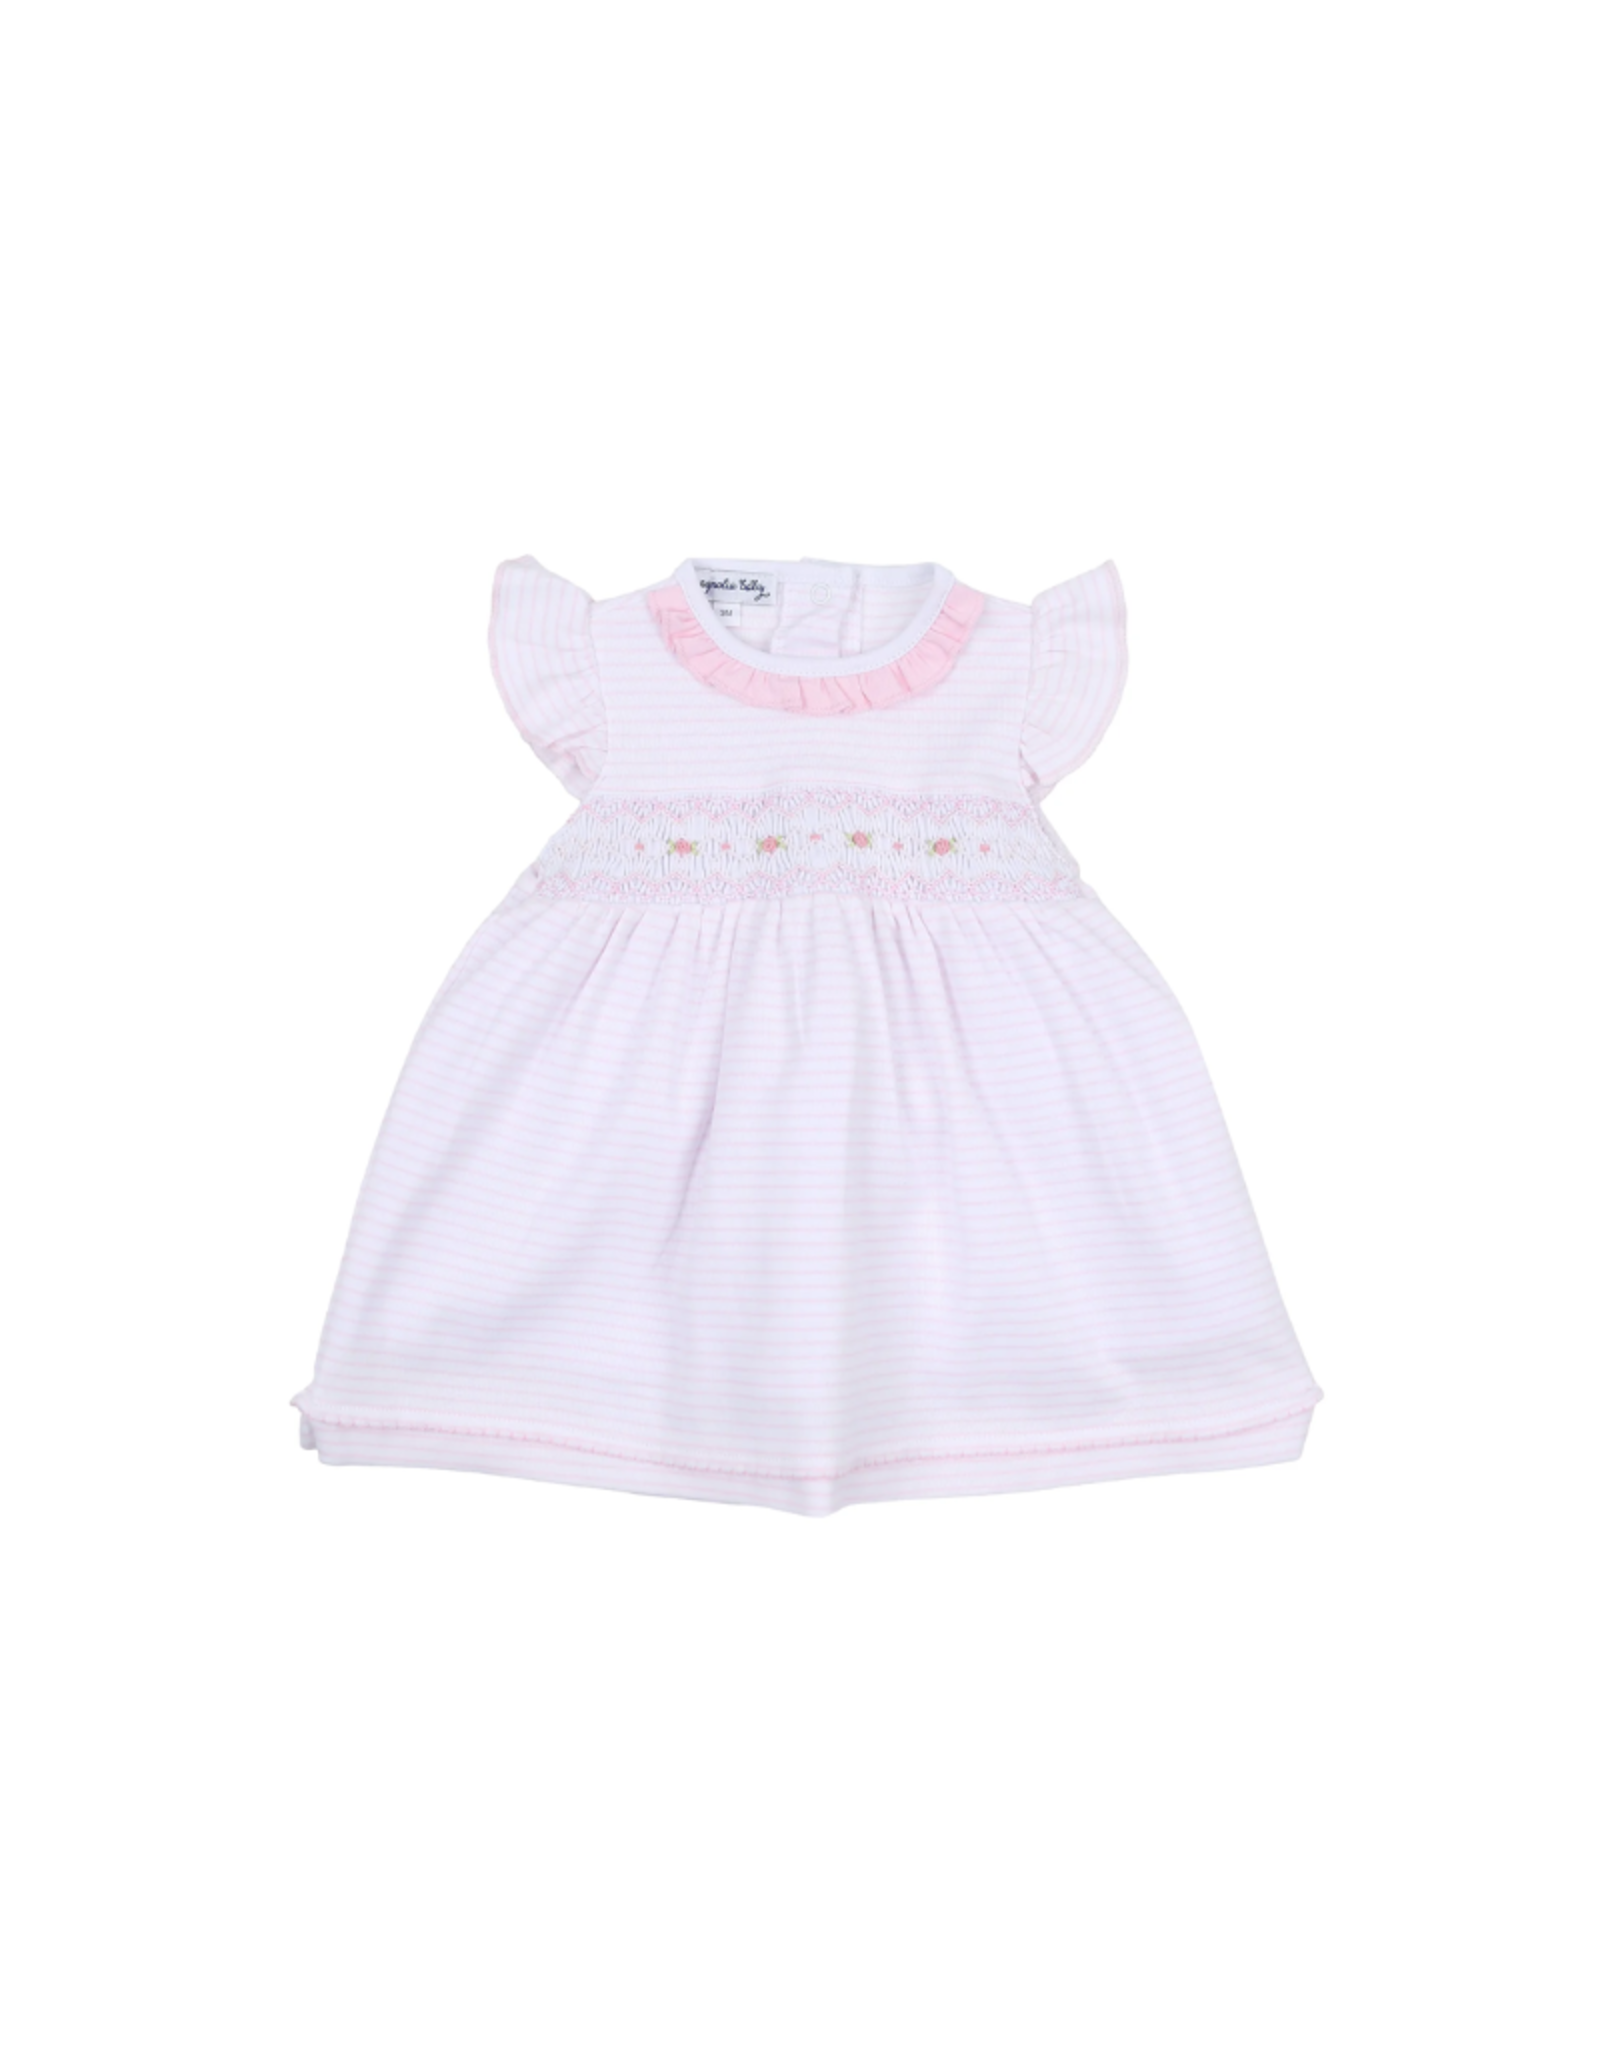 Magnolia Baby Katie & Kyle Pink Smocked Ruffle Flutters Dress